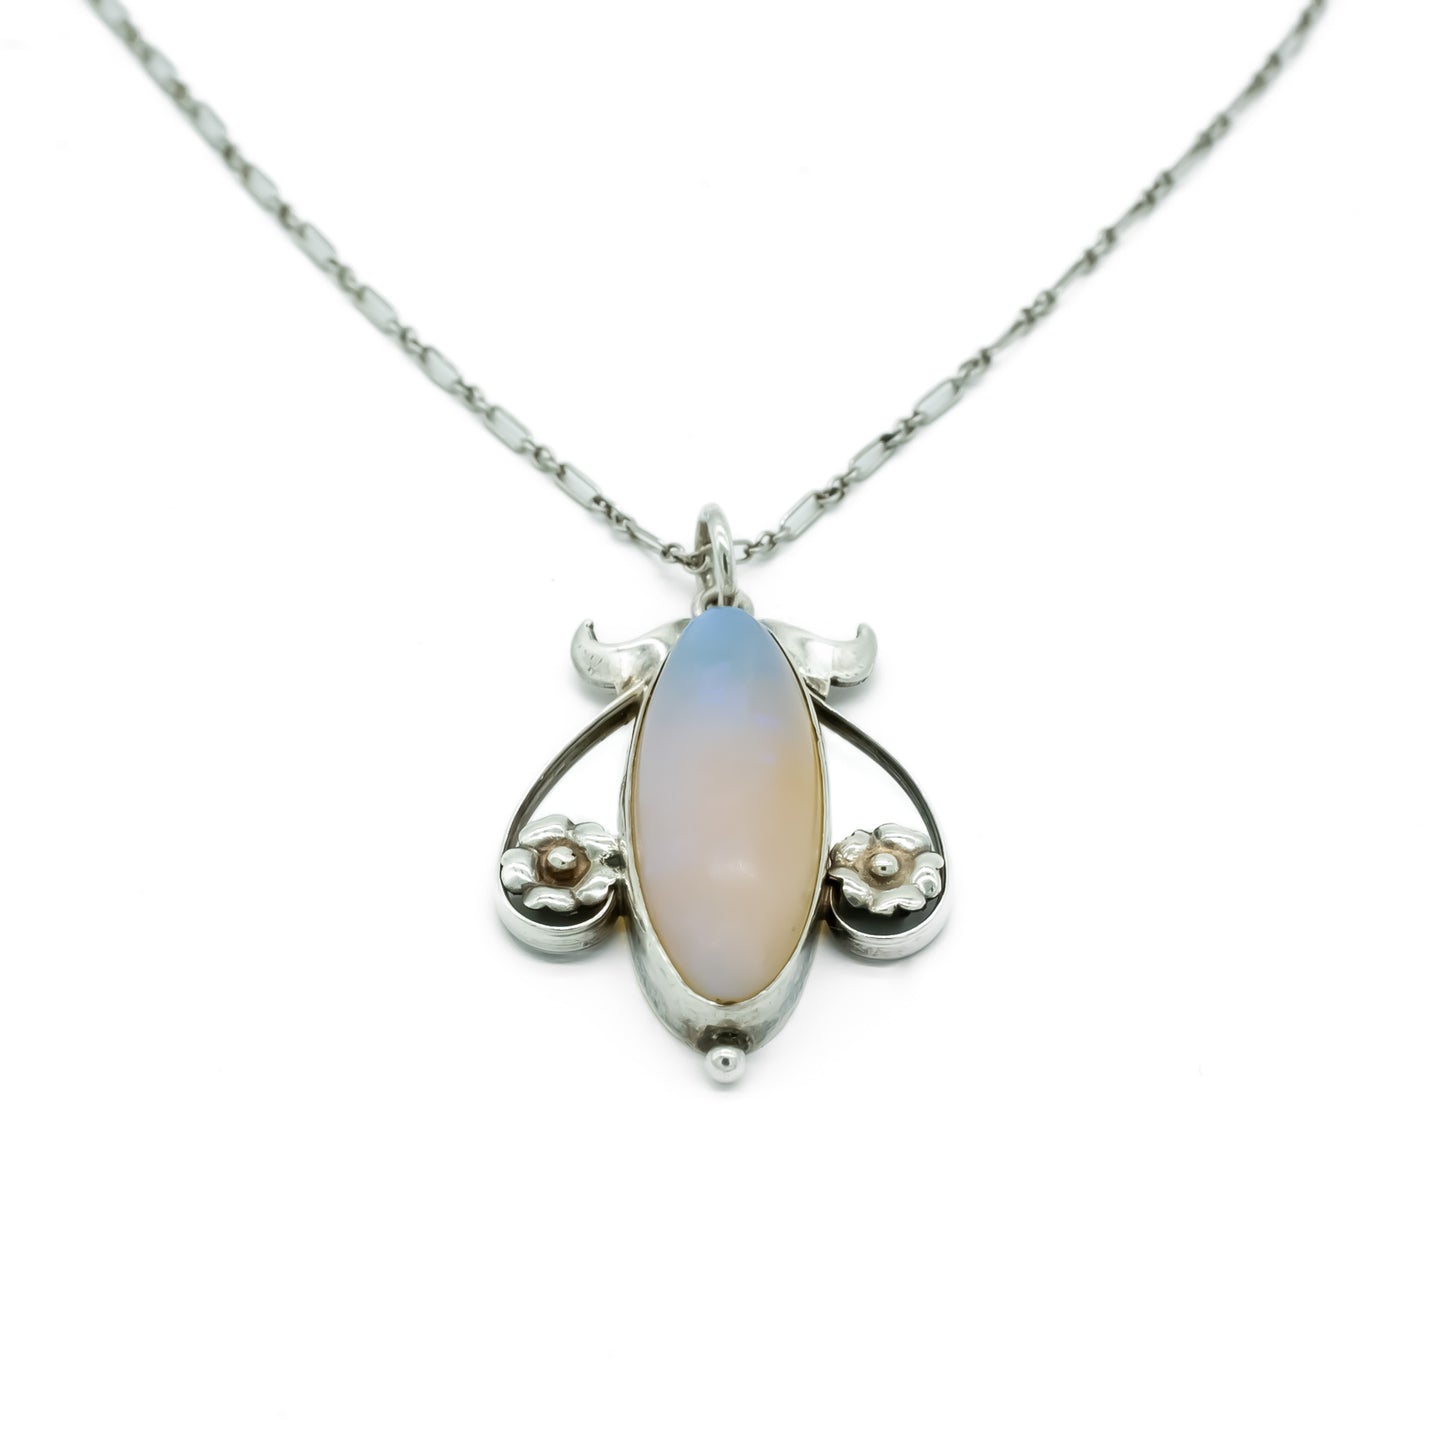 Exquisite silver Art Nouveau pendant set with a luminescent oval moonstone on a delicate fancy link chain.